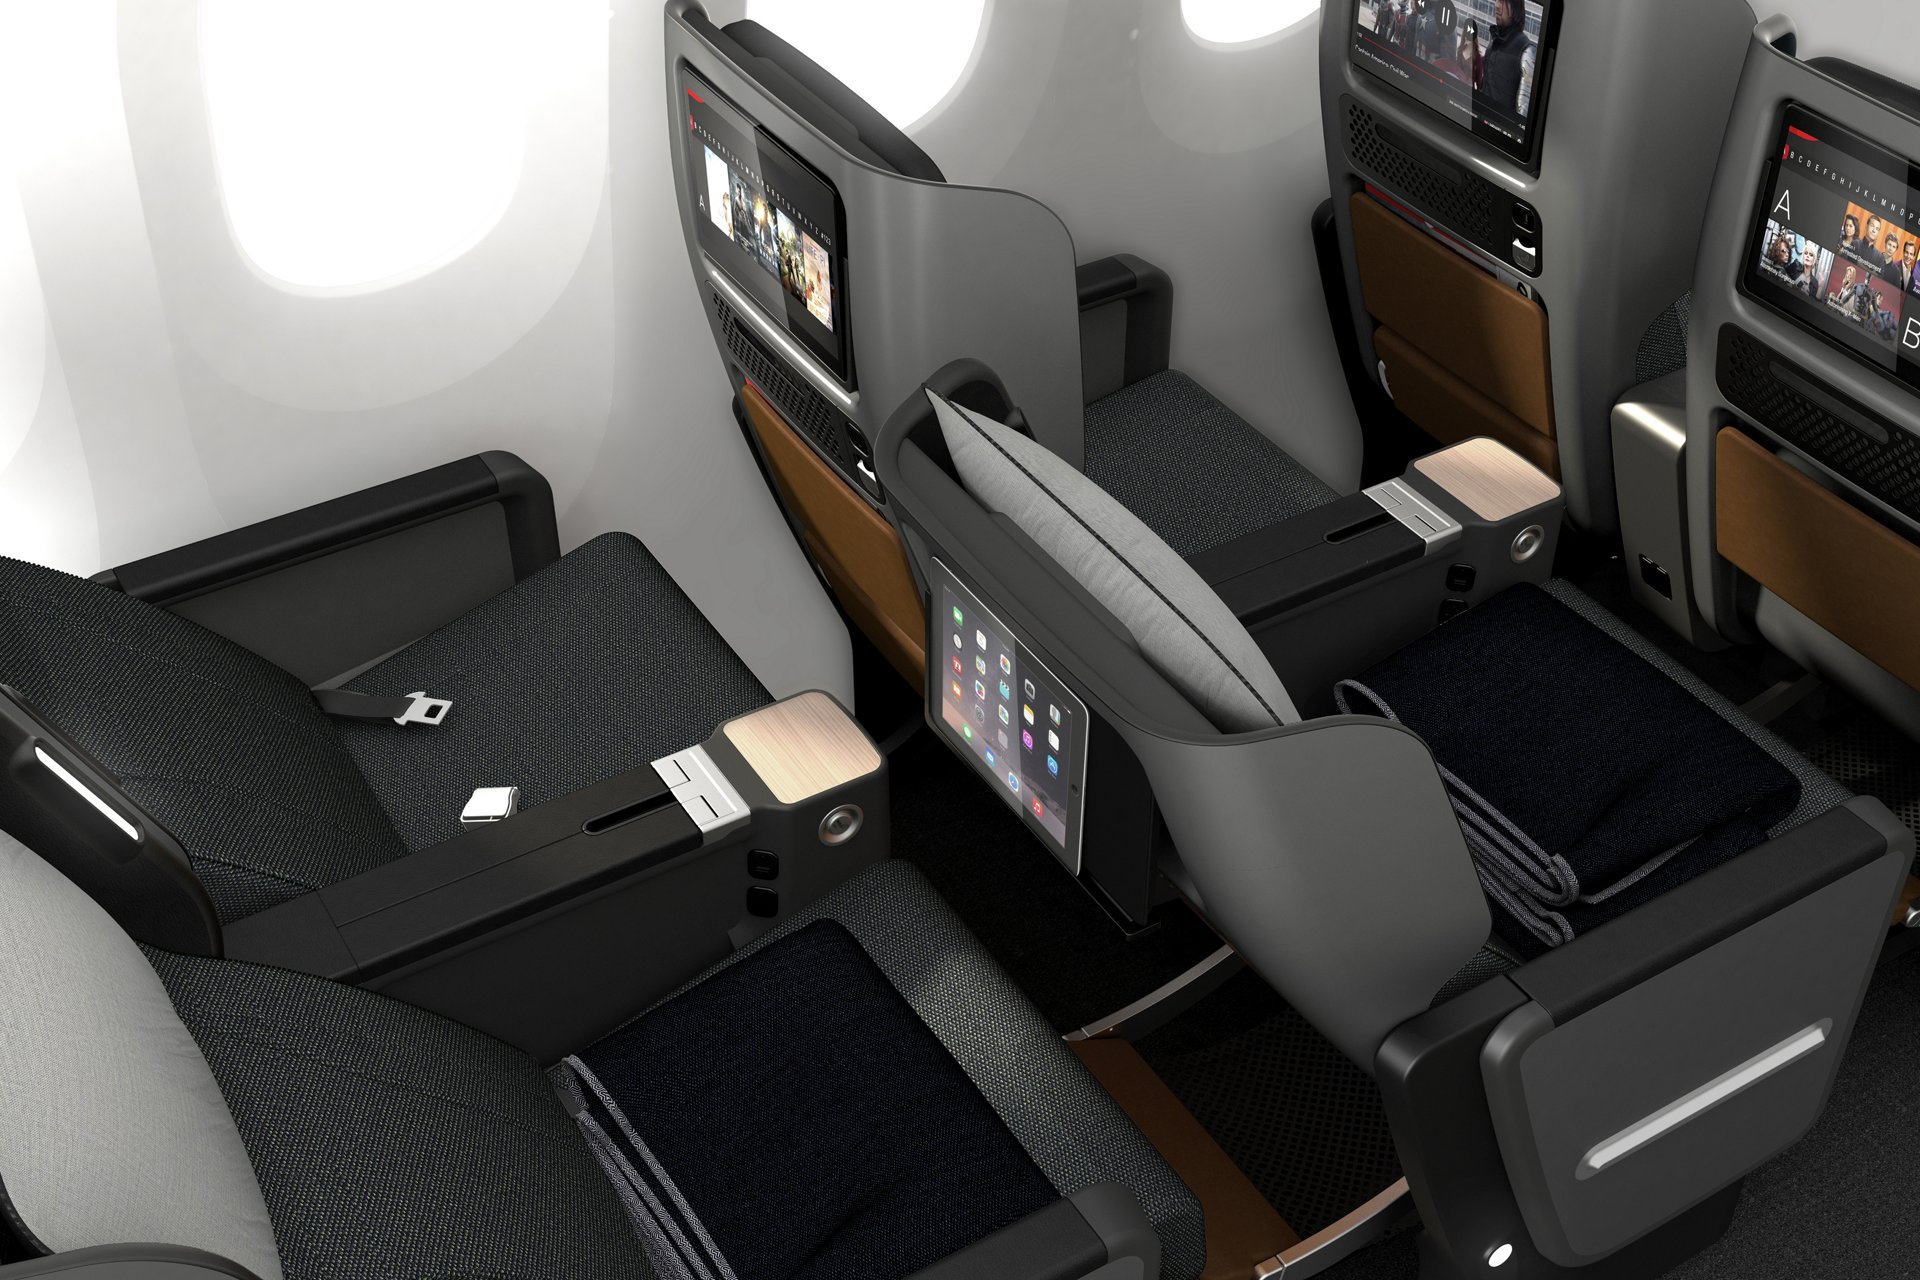 Qantas Chooses Airbus To Upgrade The Cabins Of Its A380